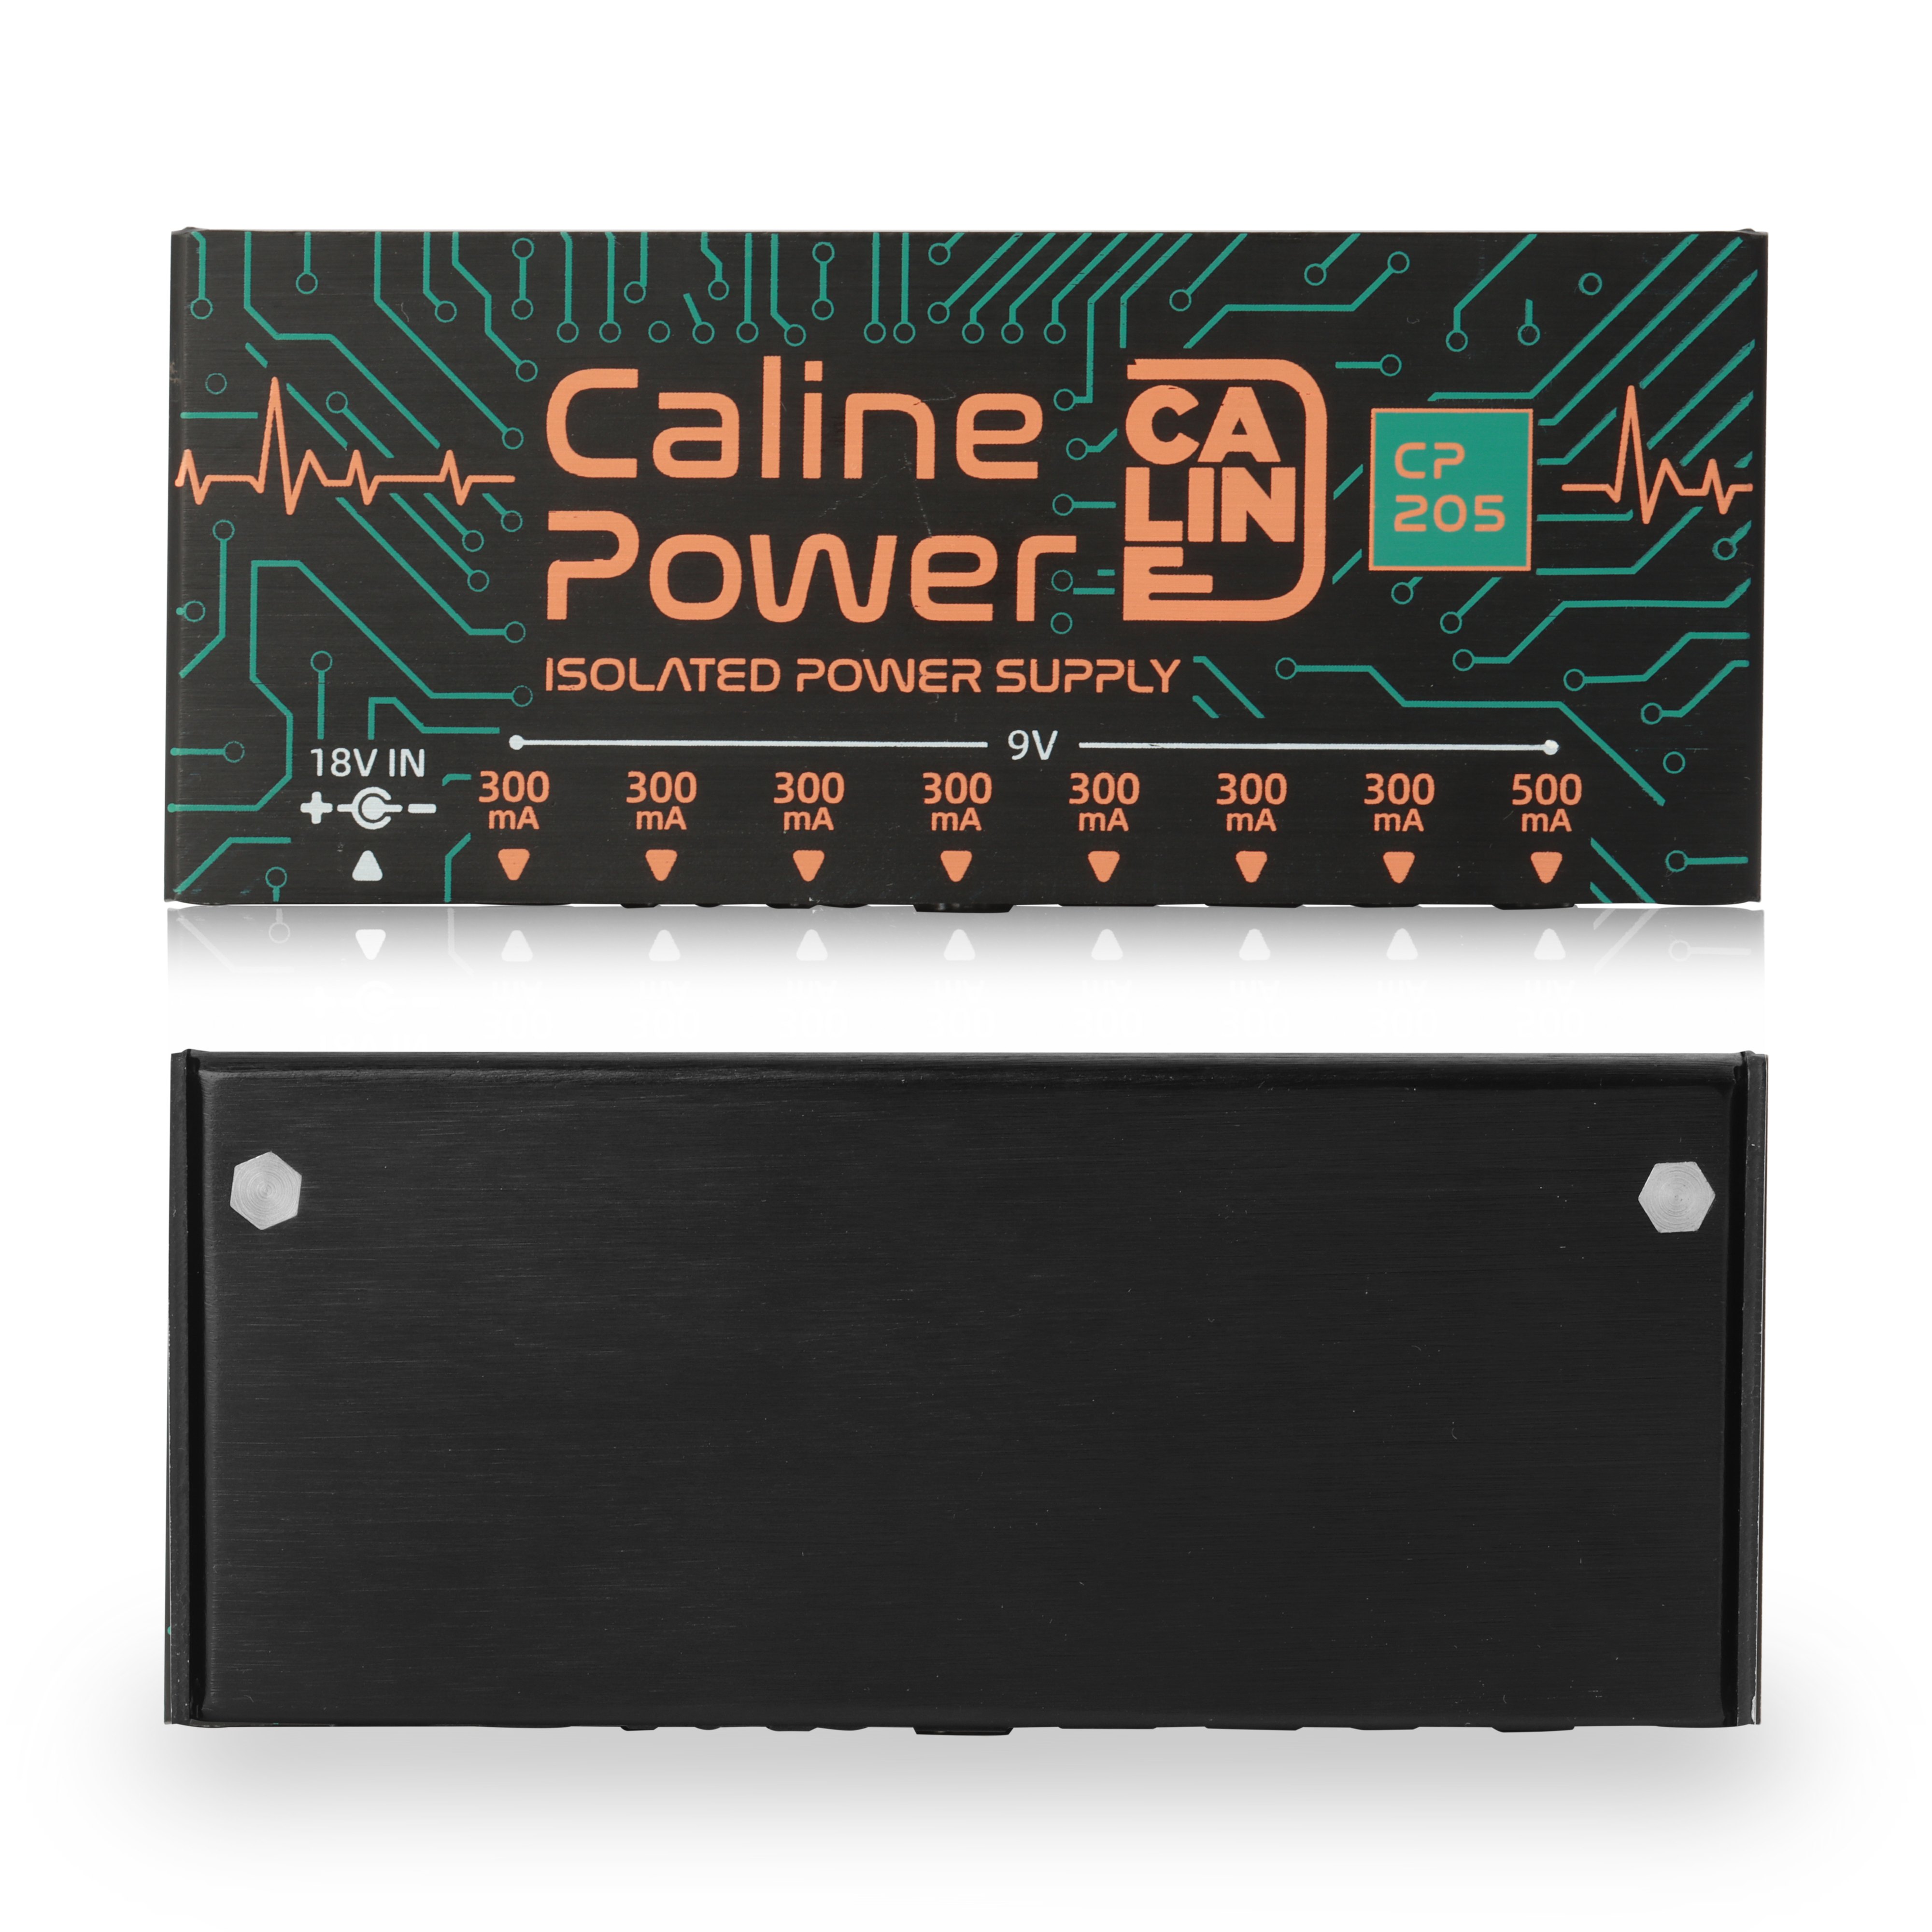 Caline CP-205 Fully Isolated Power supply with IC design